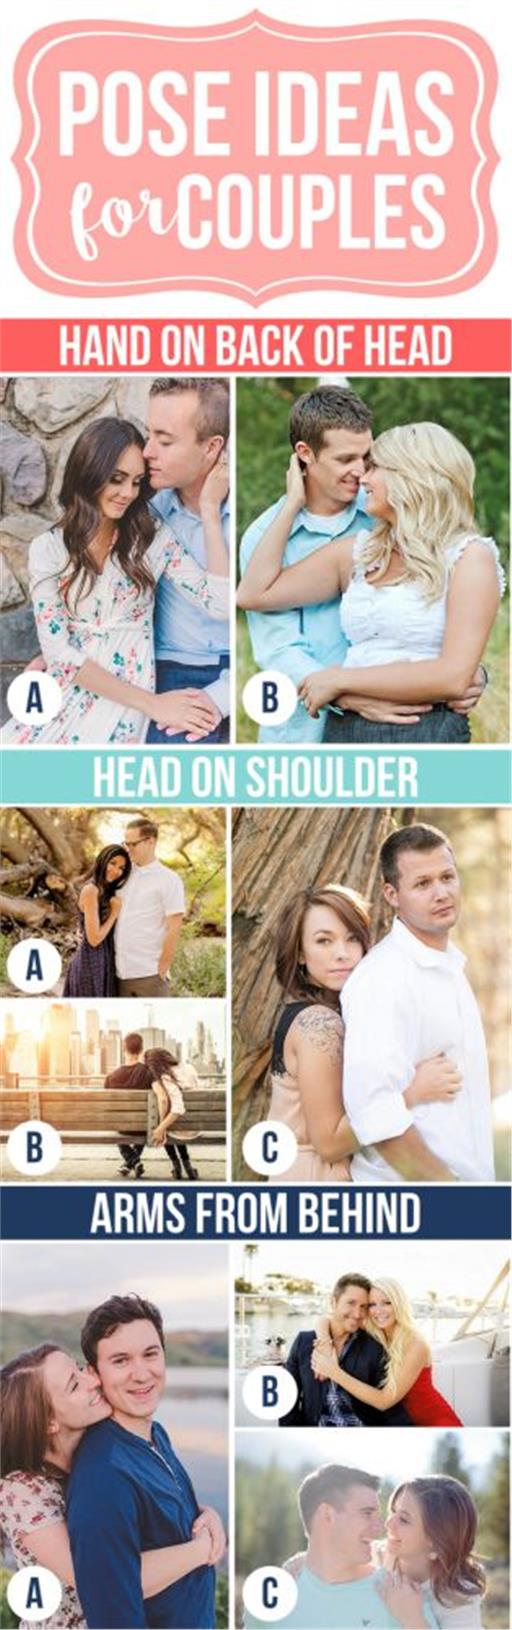 27396767_Pose_Ideas_for_Couples_2.limghandler